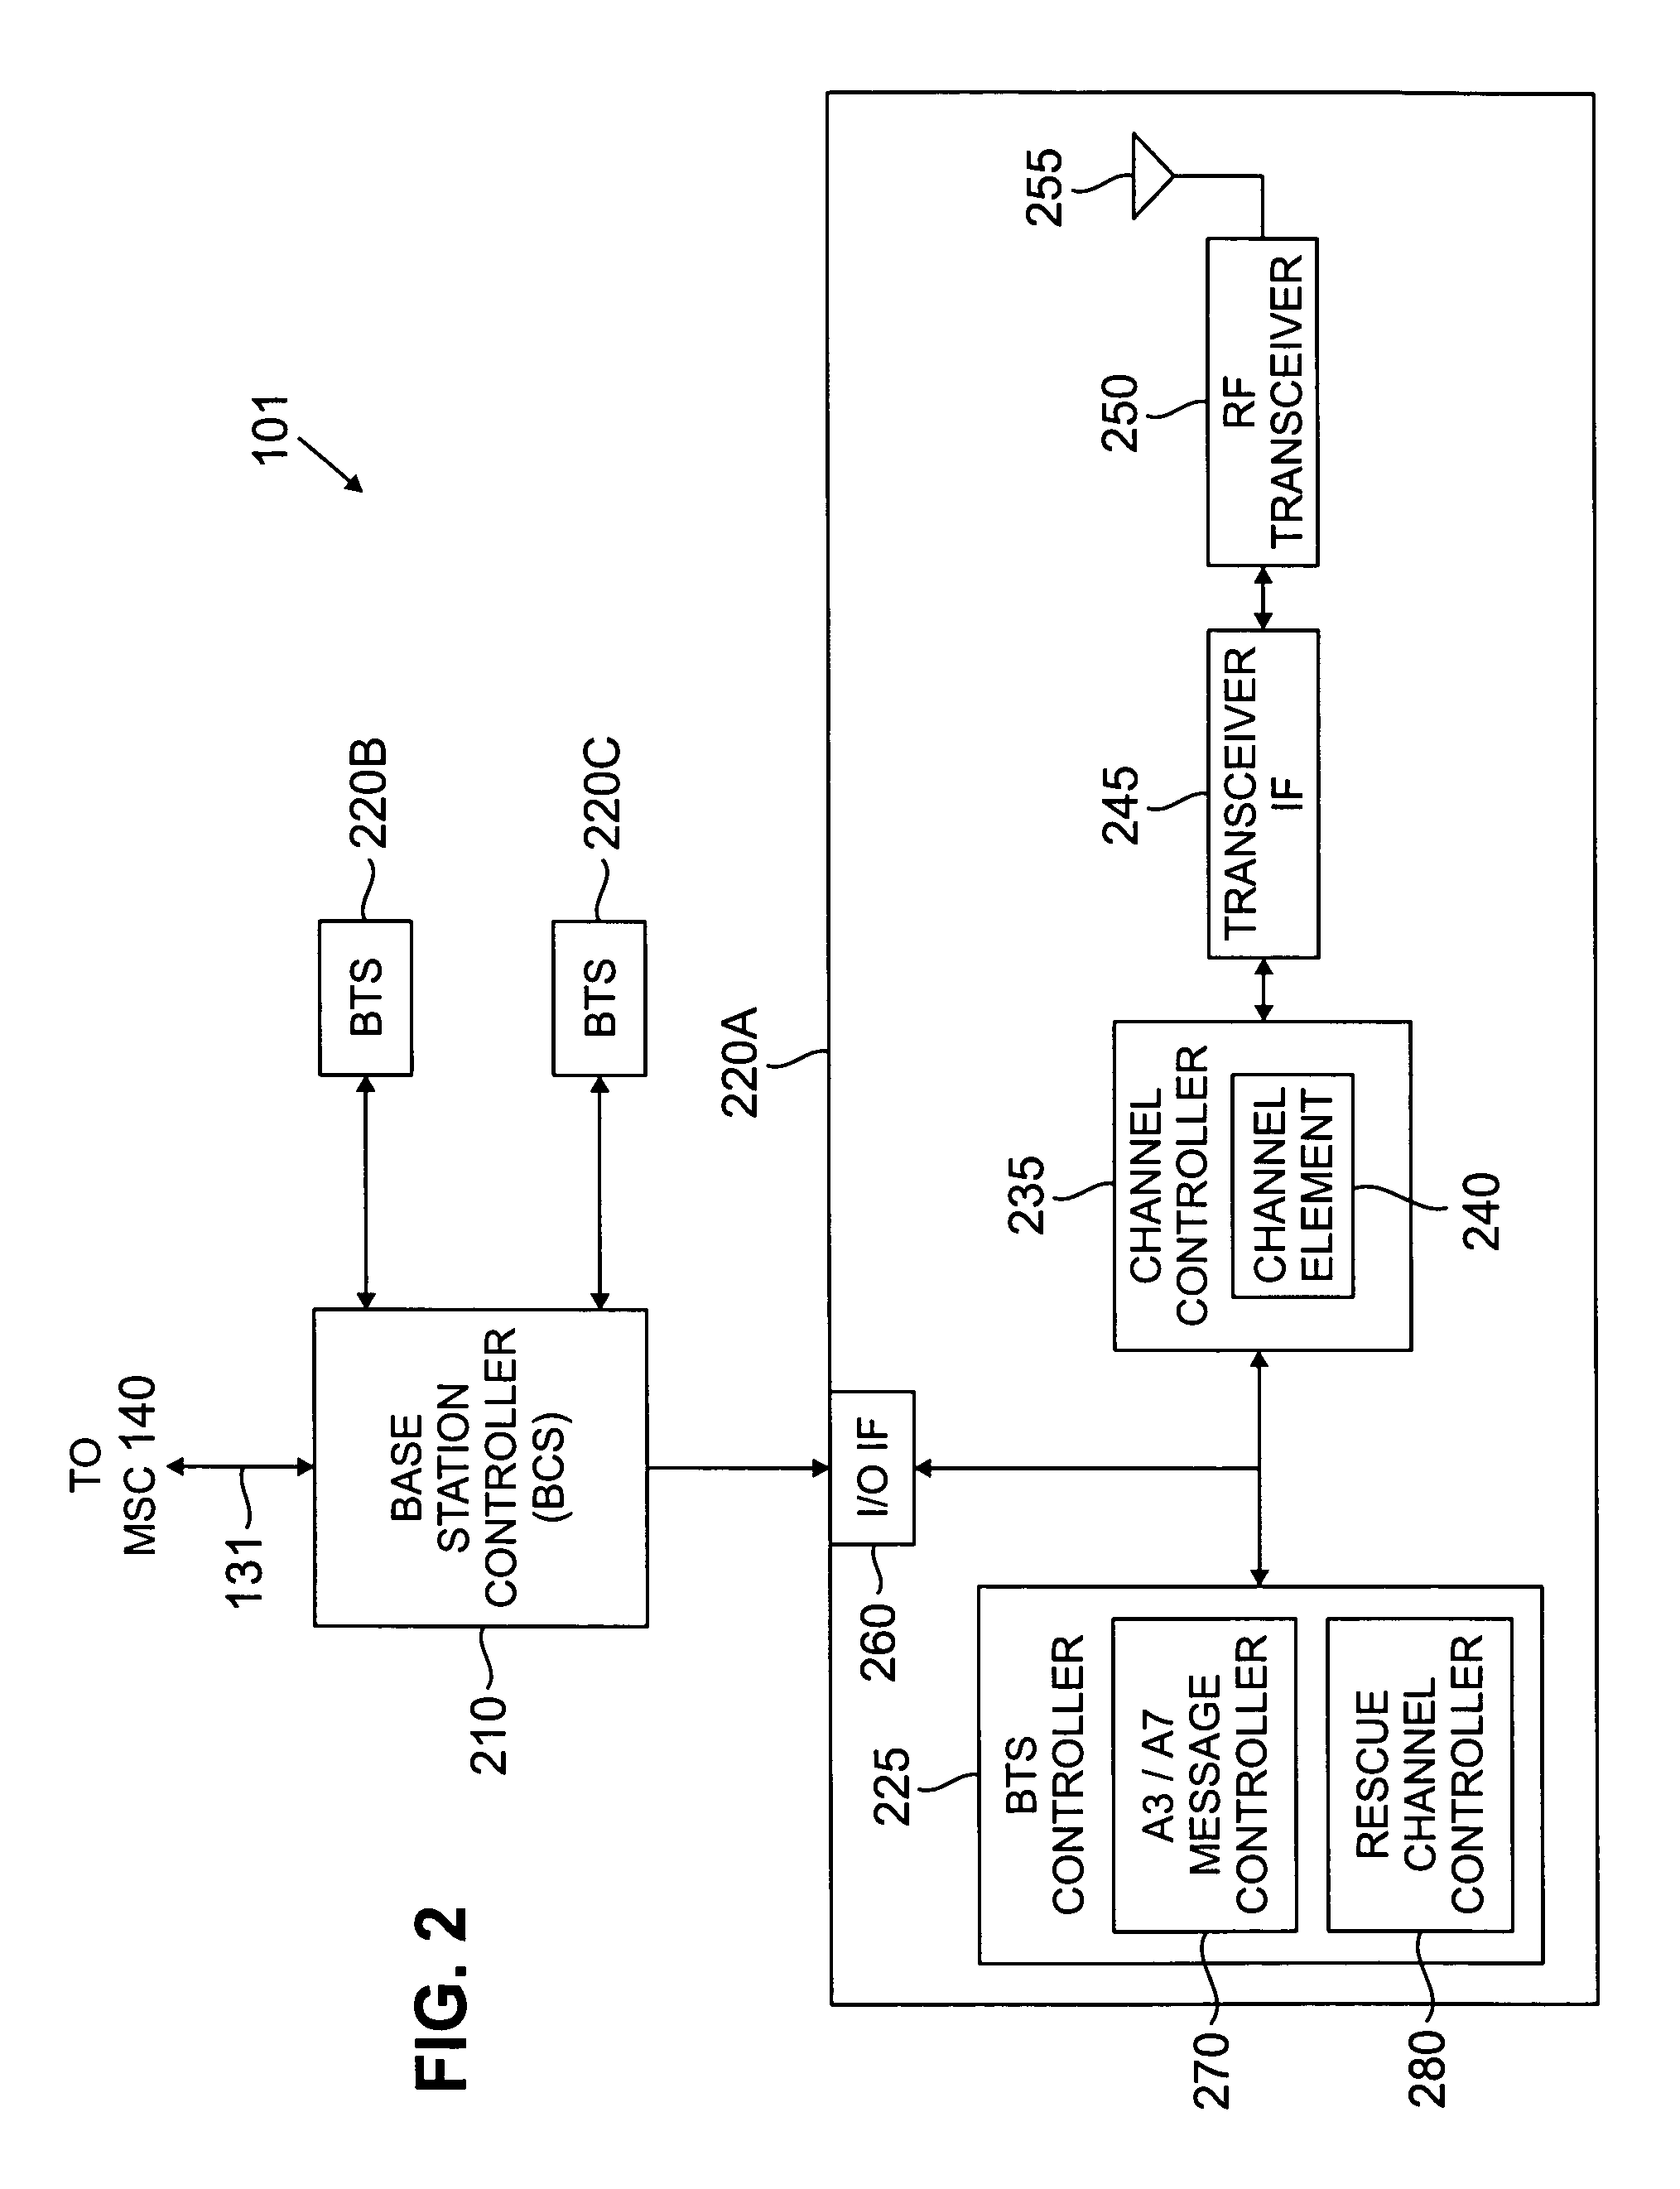 System and method for providing rescue channel communications between base stations in a wireless communication system